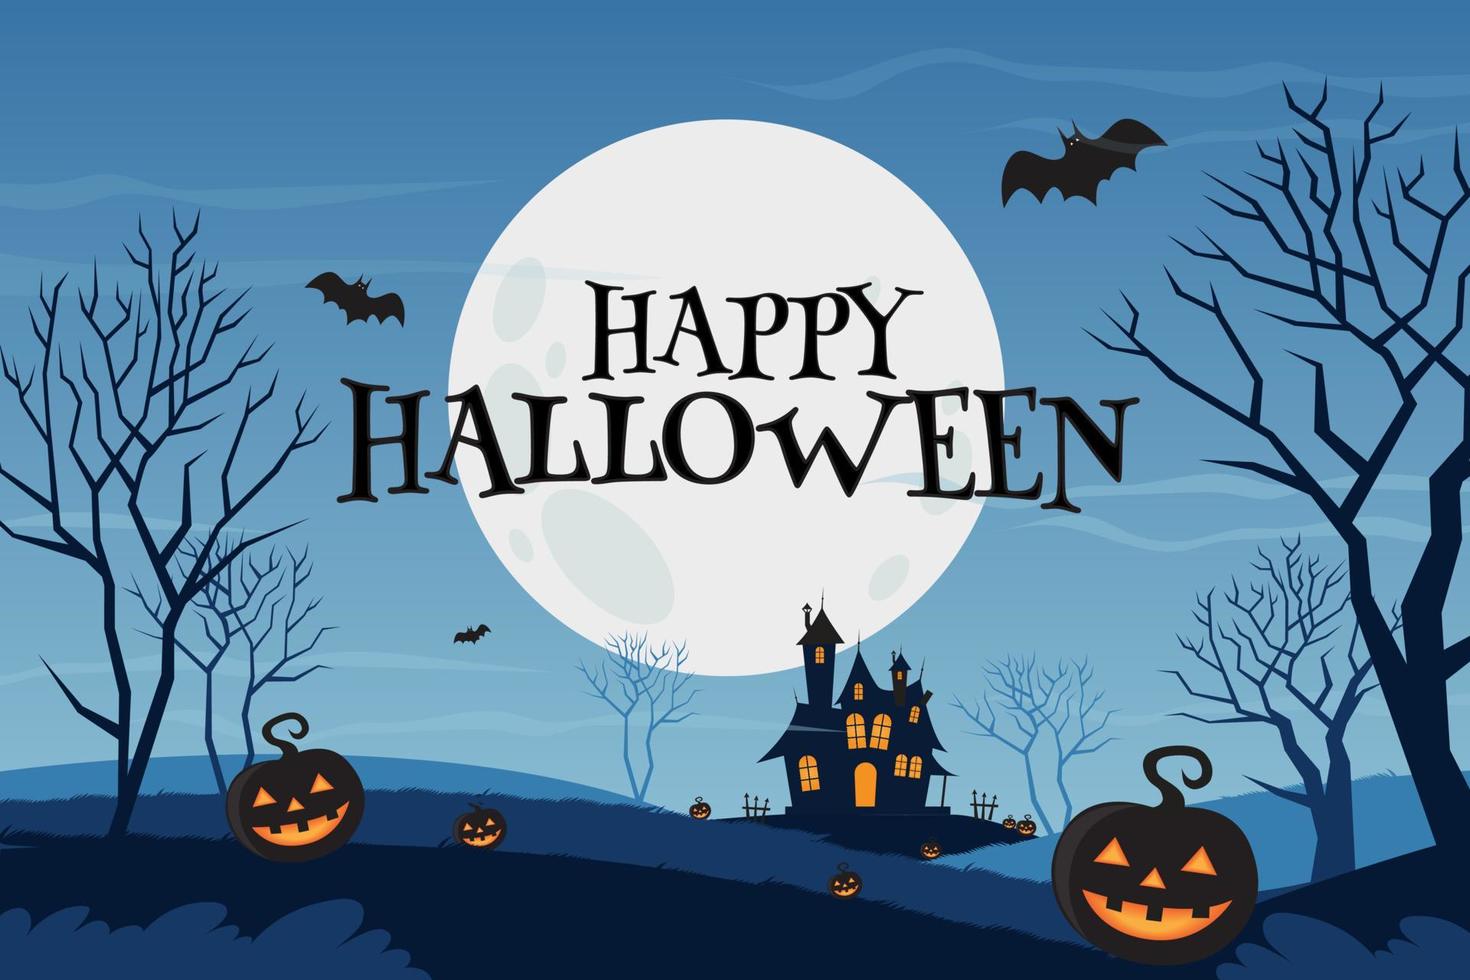 Creepy and Scary Design Illustration of Halloween with pumpkins, trees, ant and dark mansion on blue Moon background. vector